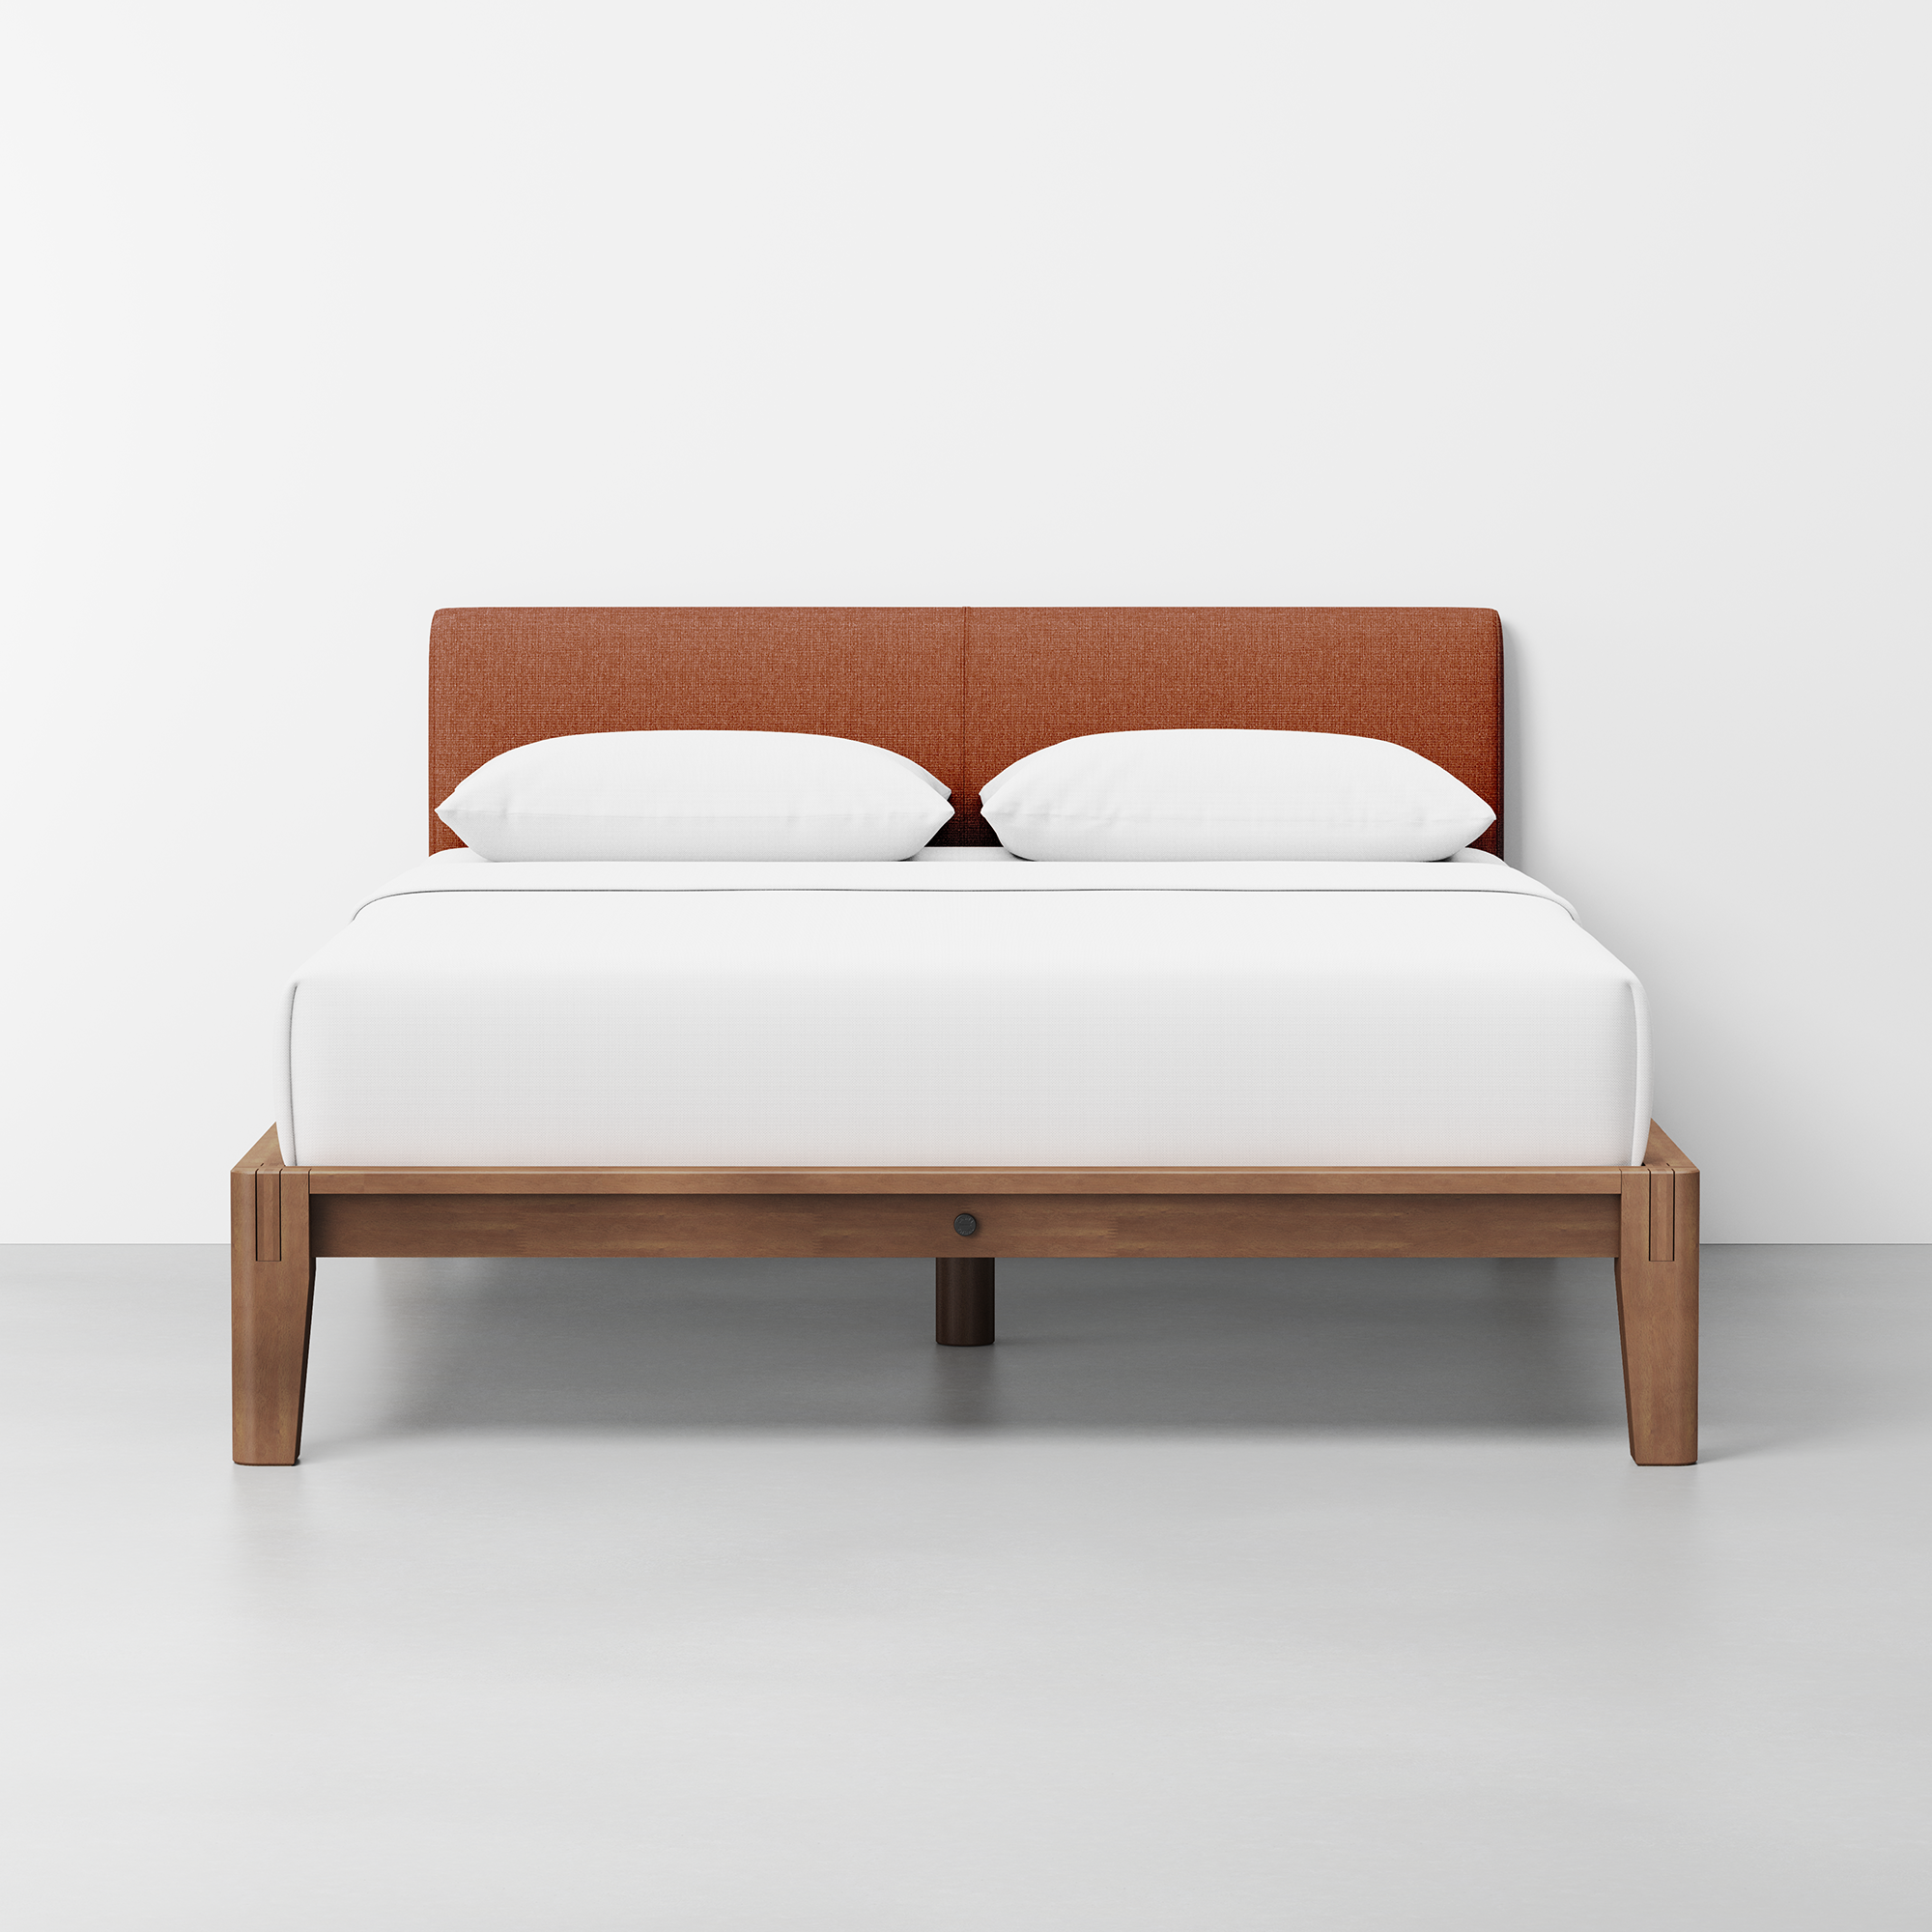 The Bed (Walnut / Terracotta) - Render - Front